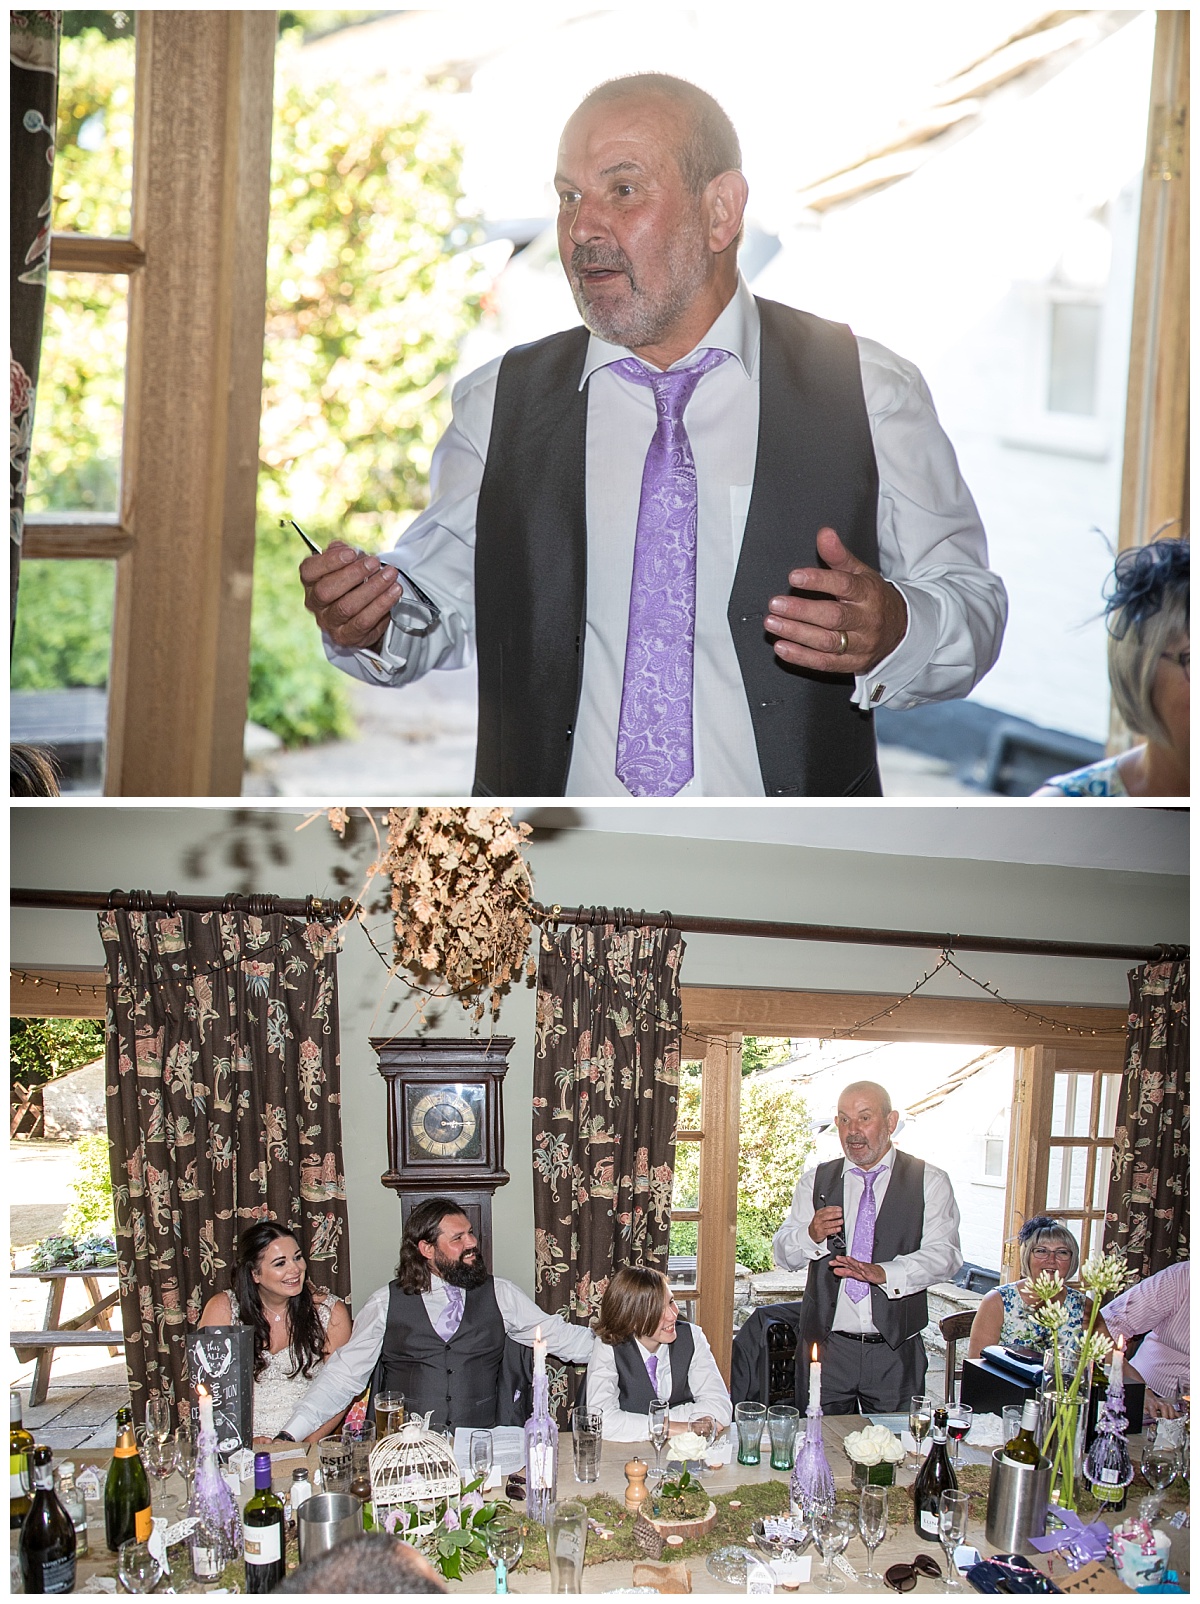 Wedding Photography Manchester - Lauren and Colyn's Wizard Wedding 63